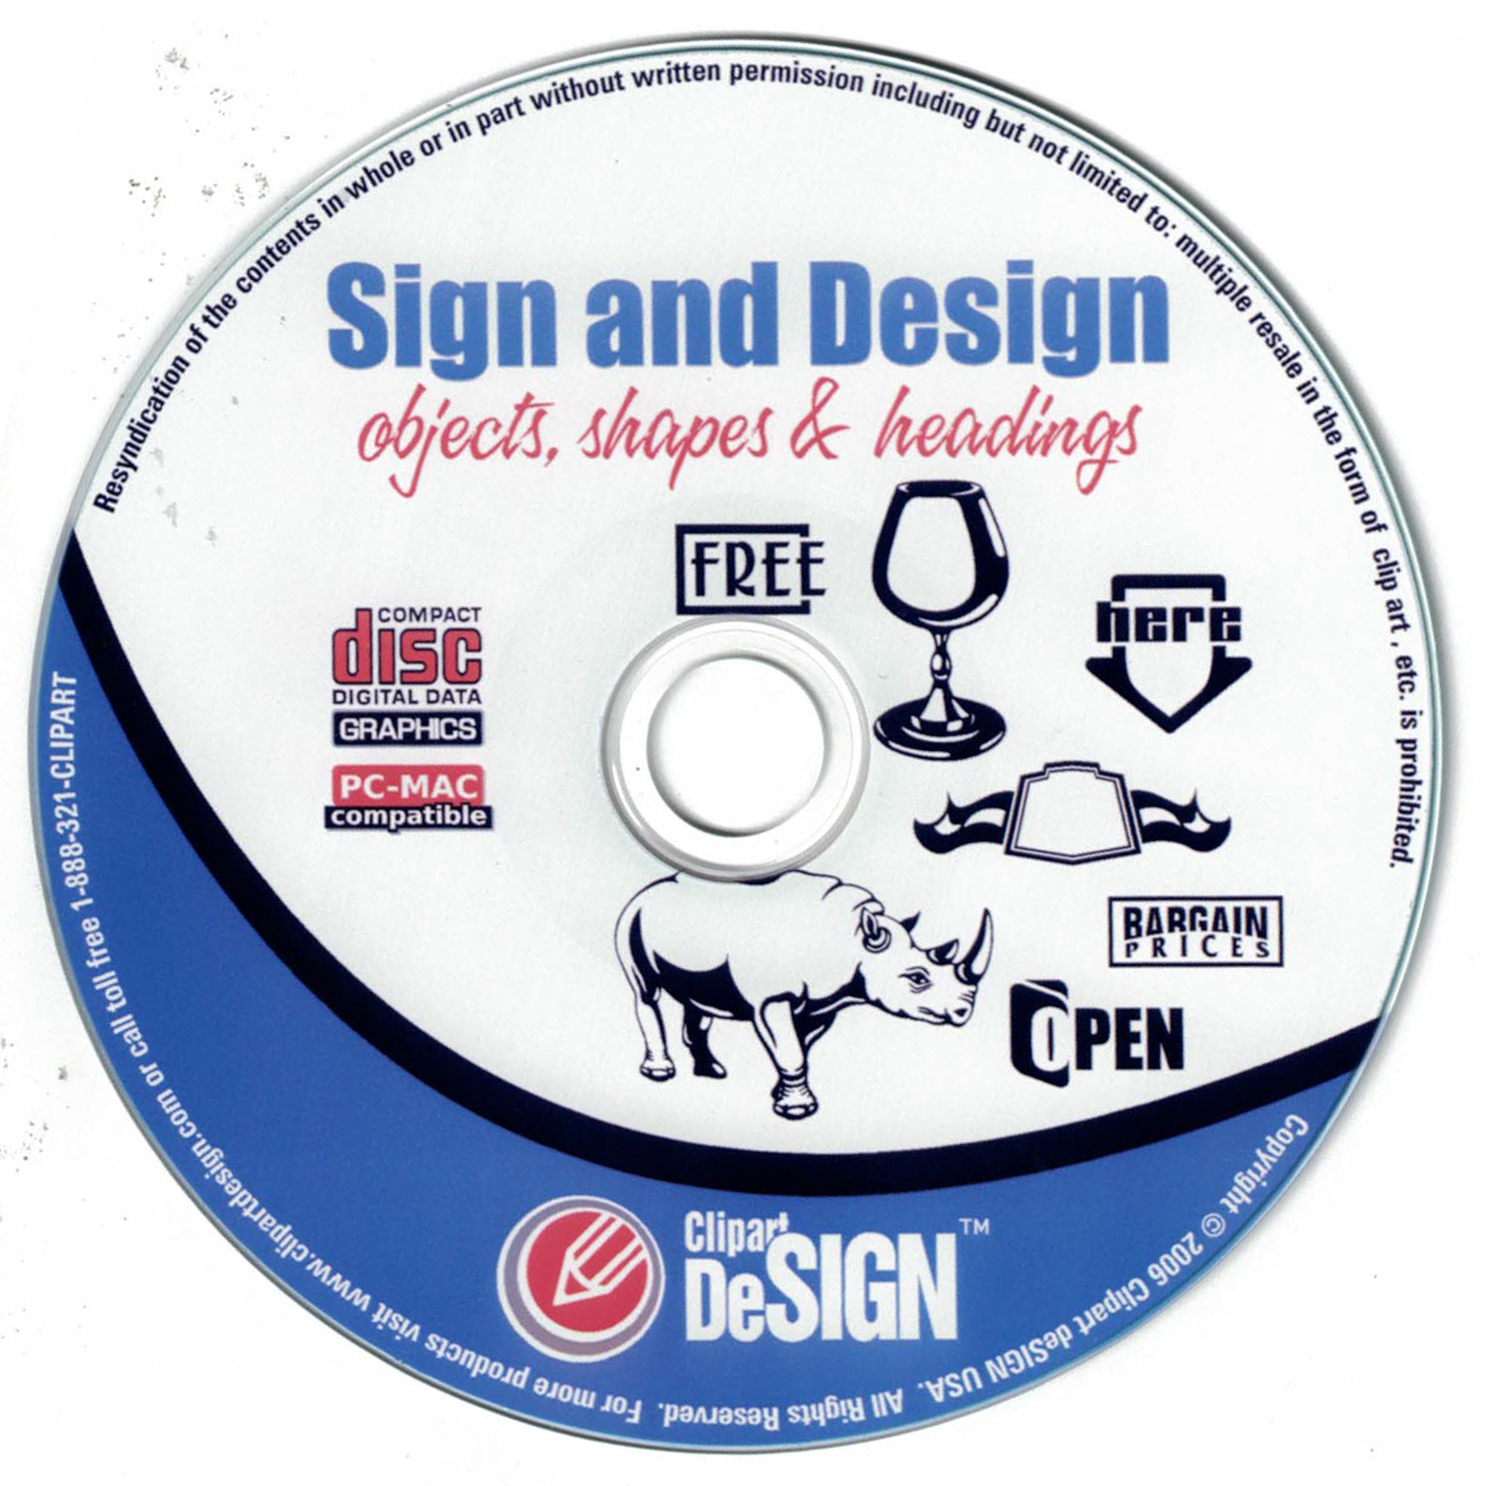 Make Your Custom Sign and Design it with many choices of Objects, Shapes and Headings